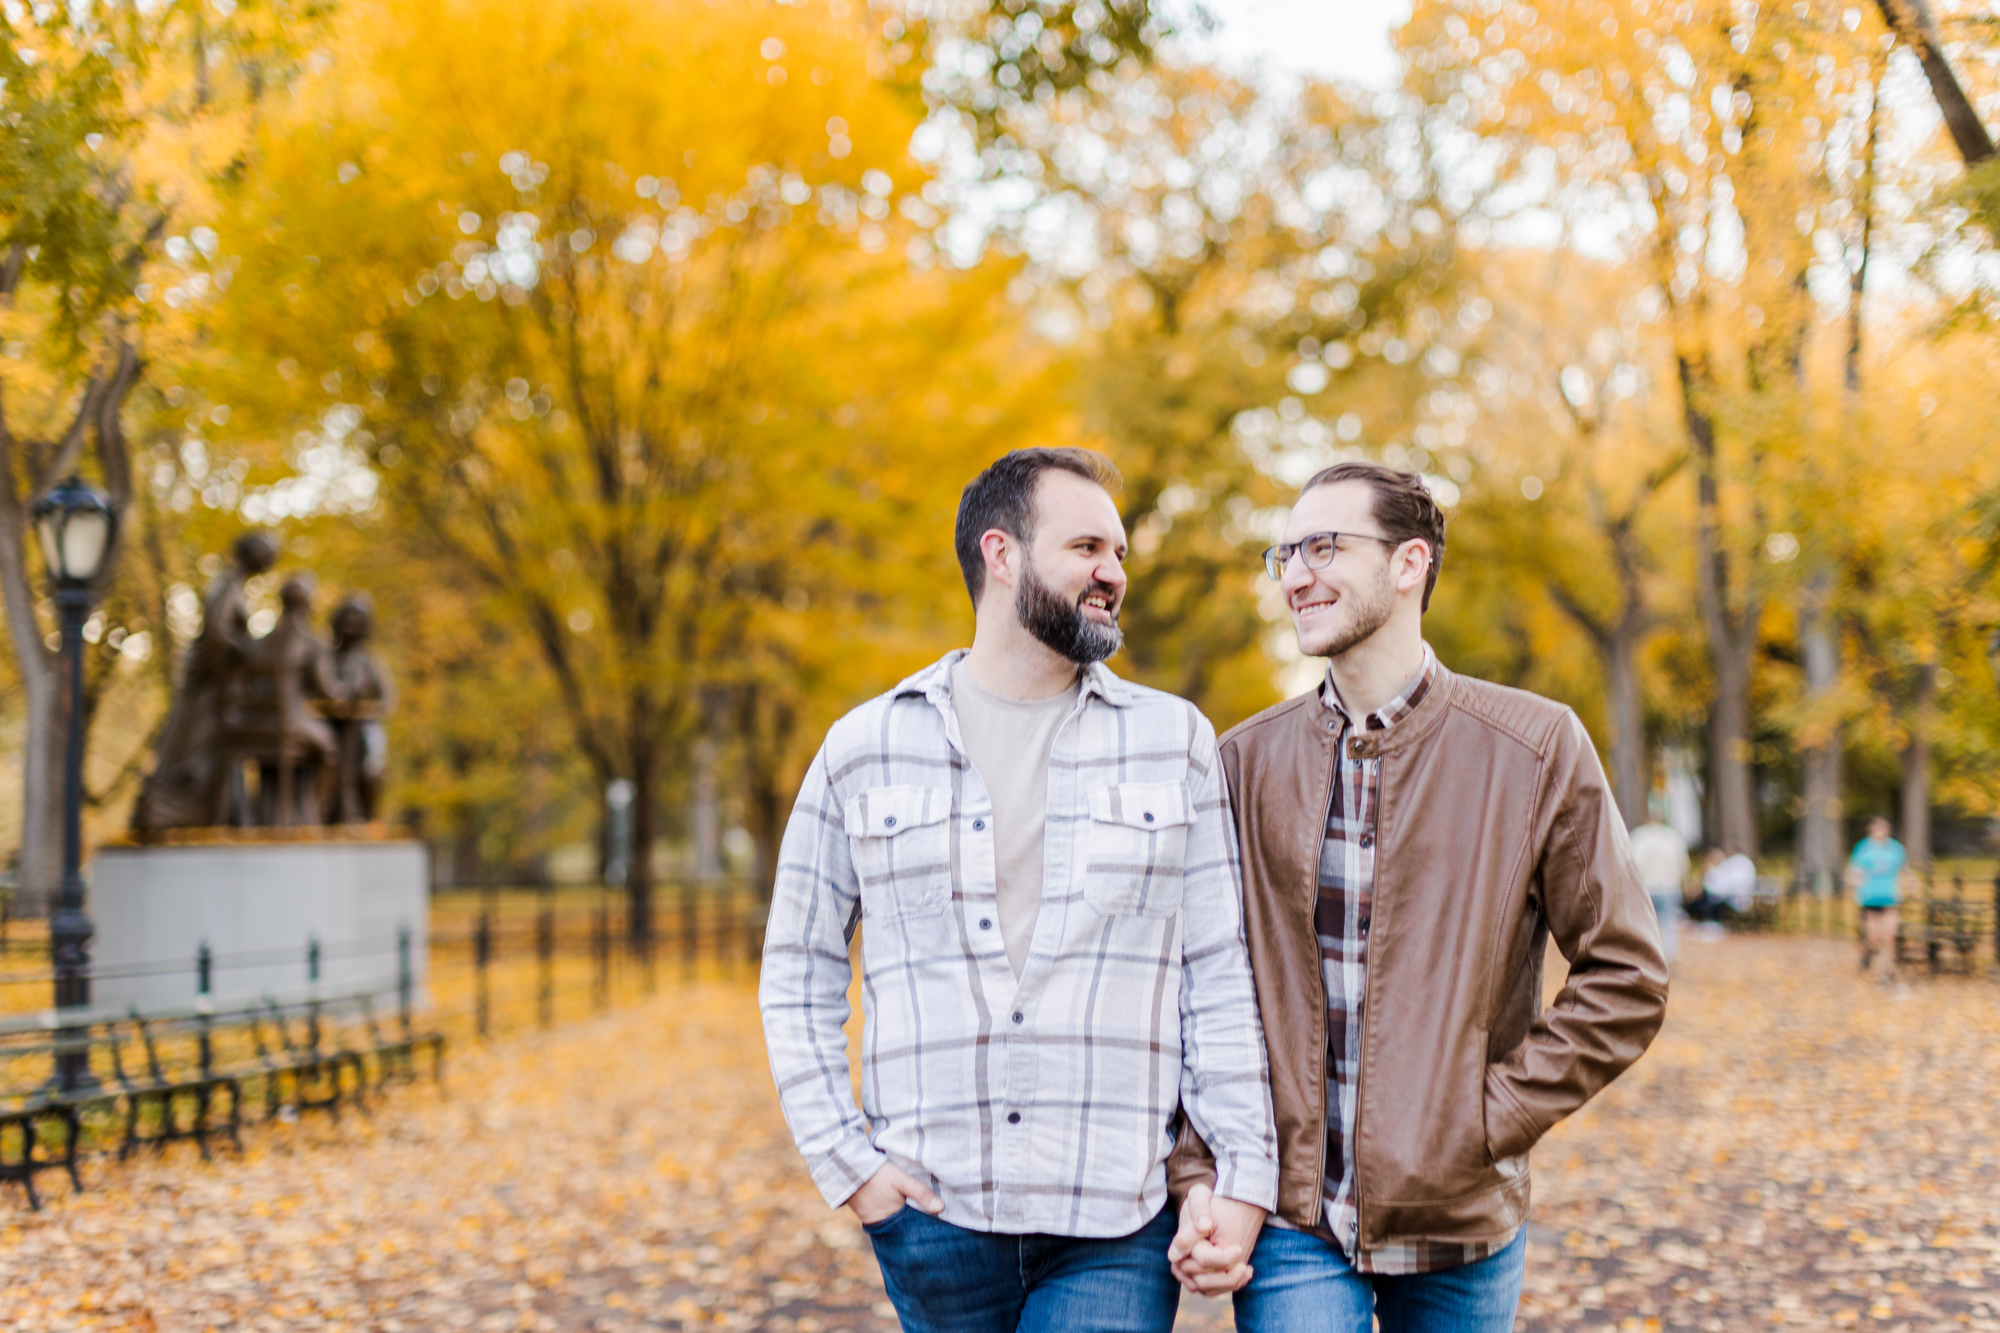 Stylish Engagement Photo Shoot in Central Park